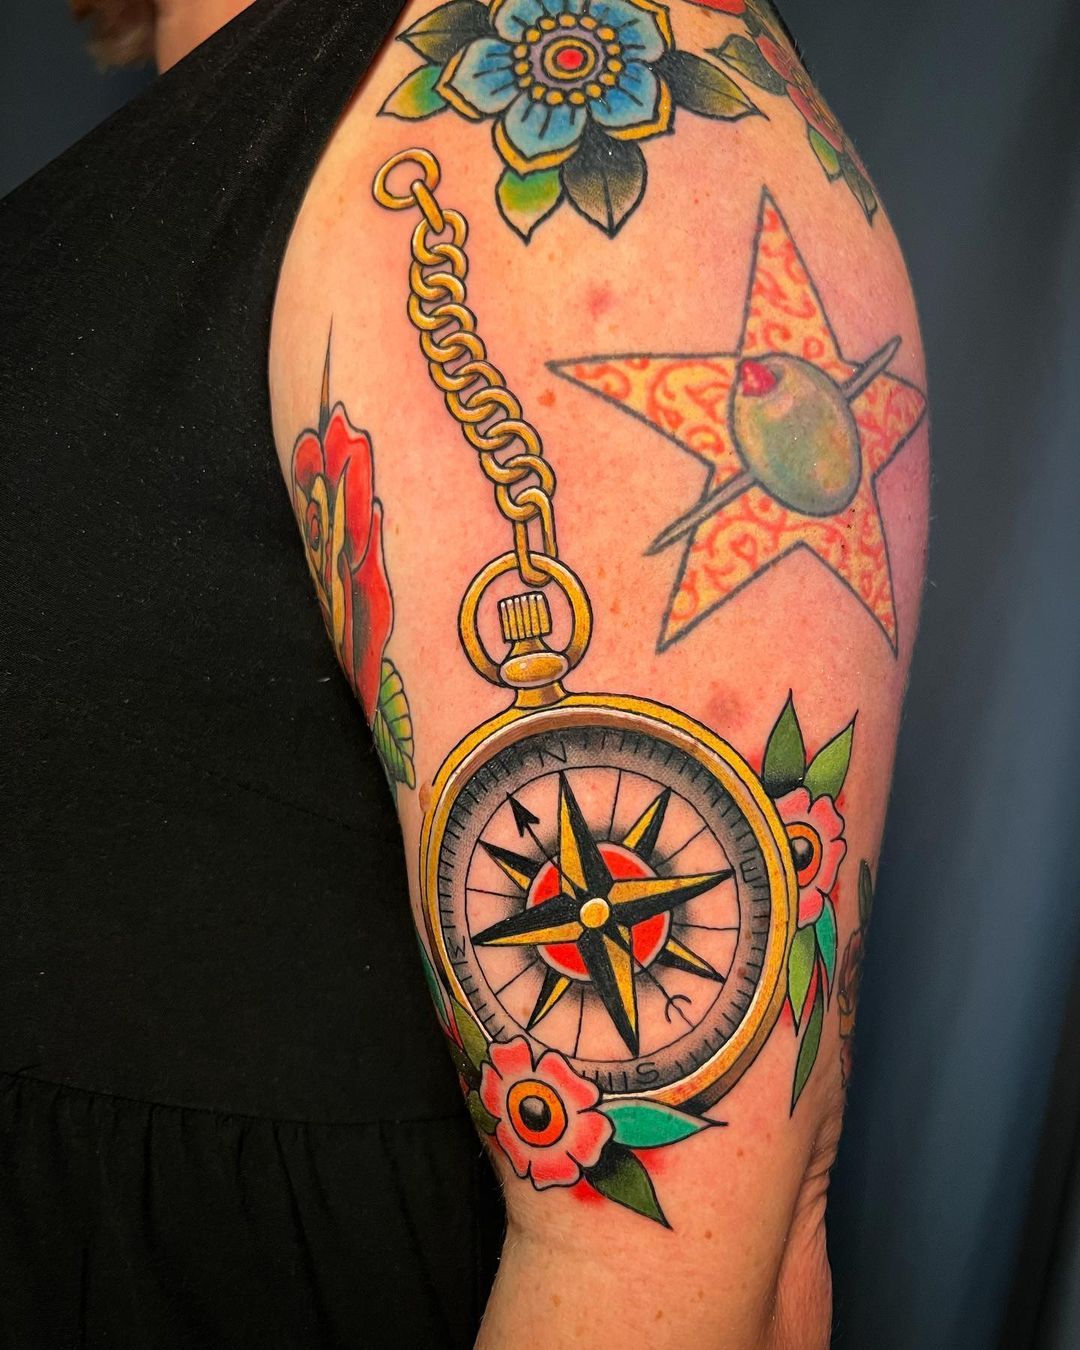 Black Ship - Tattoo Shop - Compass and World map done by Sergio Rodrigues # compass #compasstattoo #worldmaptattoo #tattooshoplife #tattooartist # tattoos #tattoo #tatts | Facebook